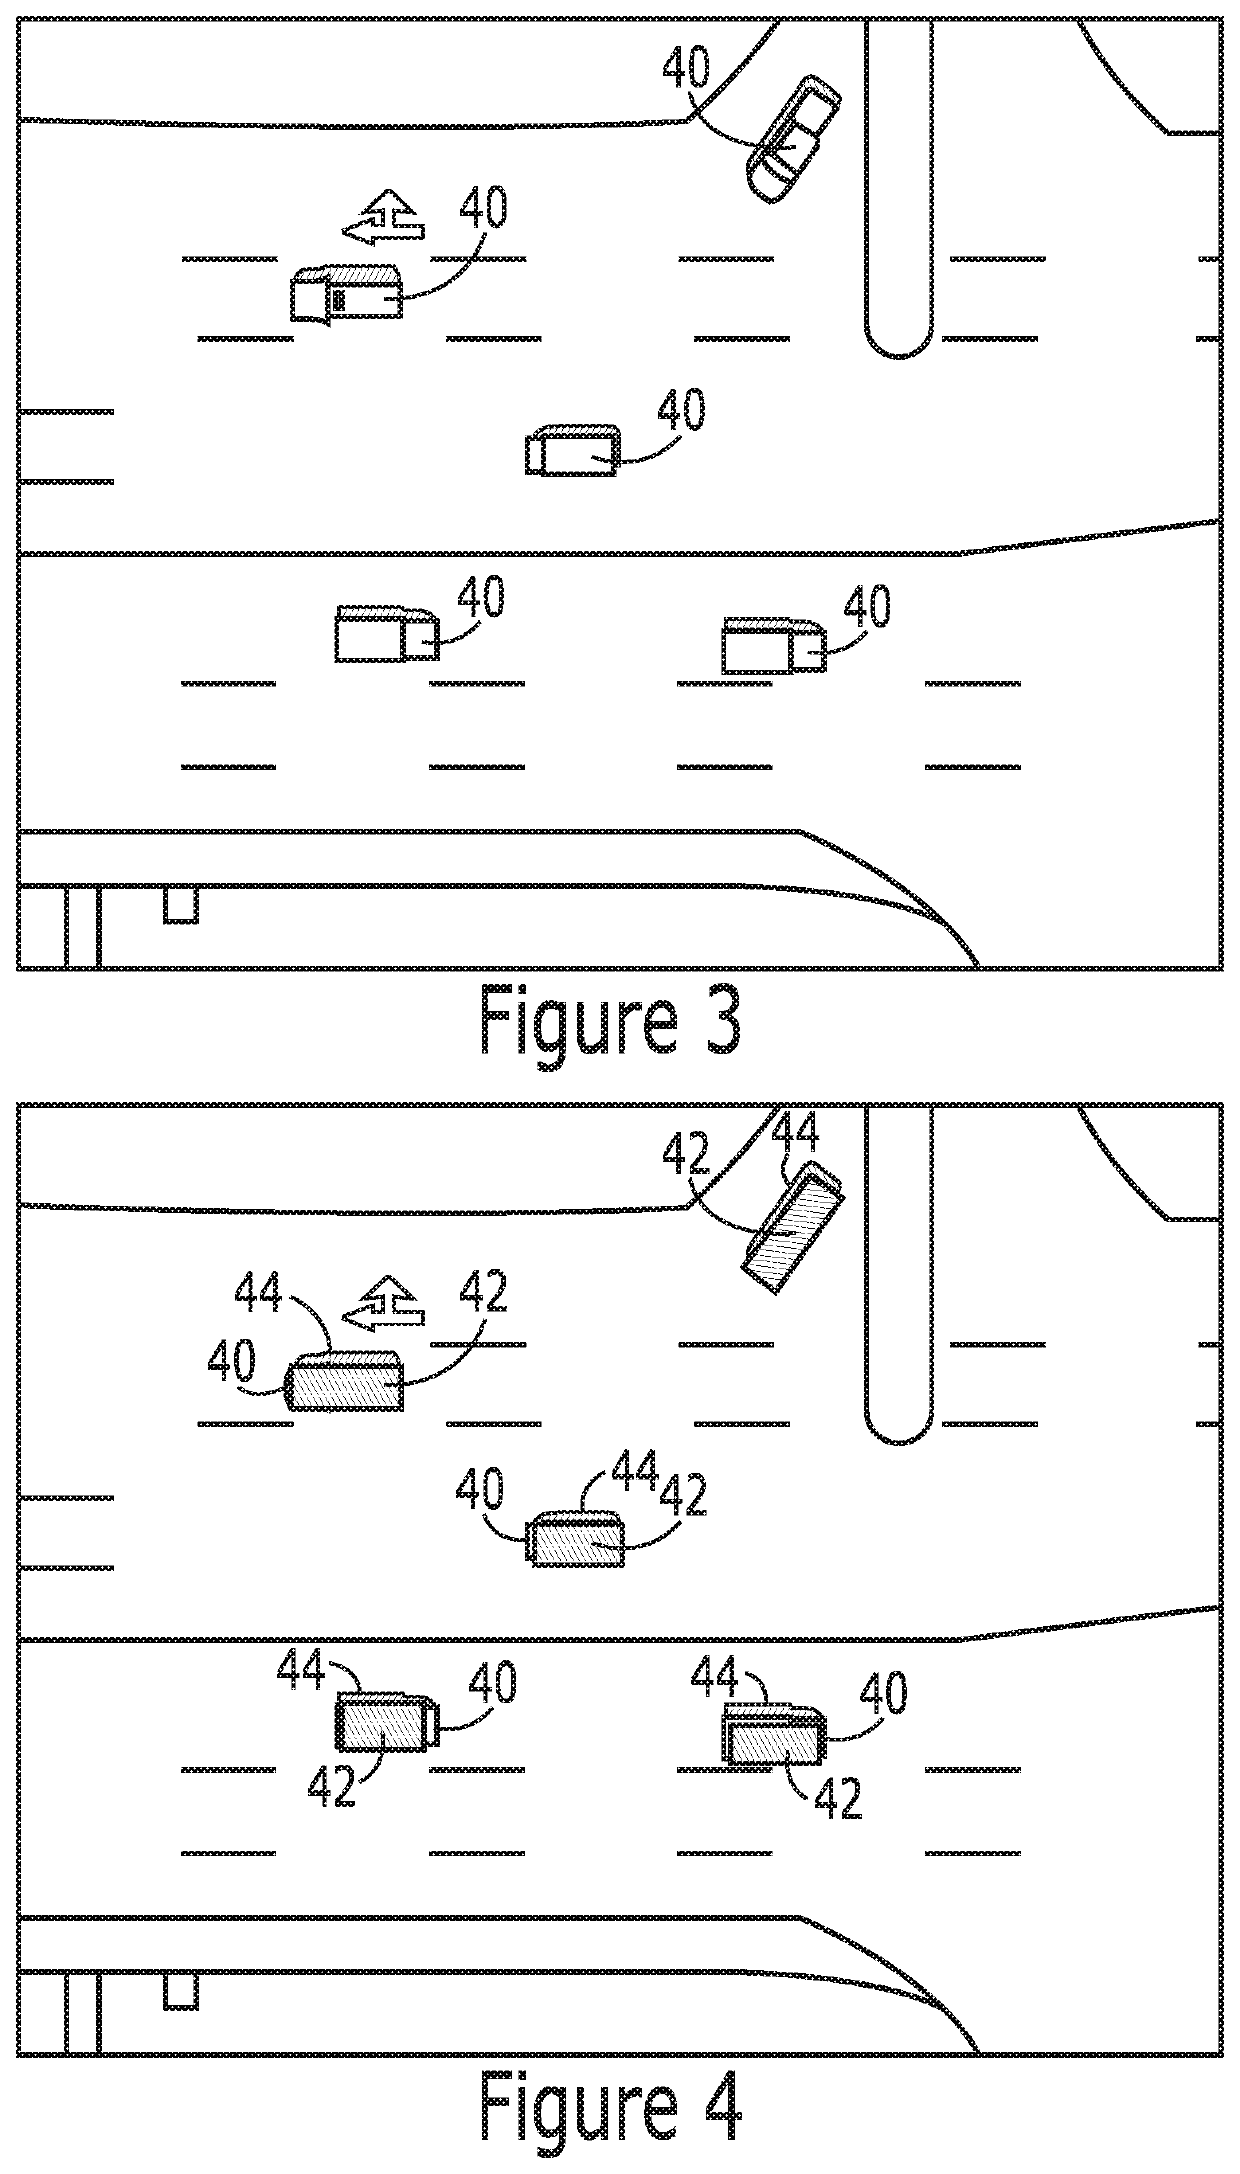 System and method for analyzing an image of a vehicle